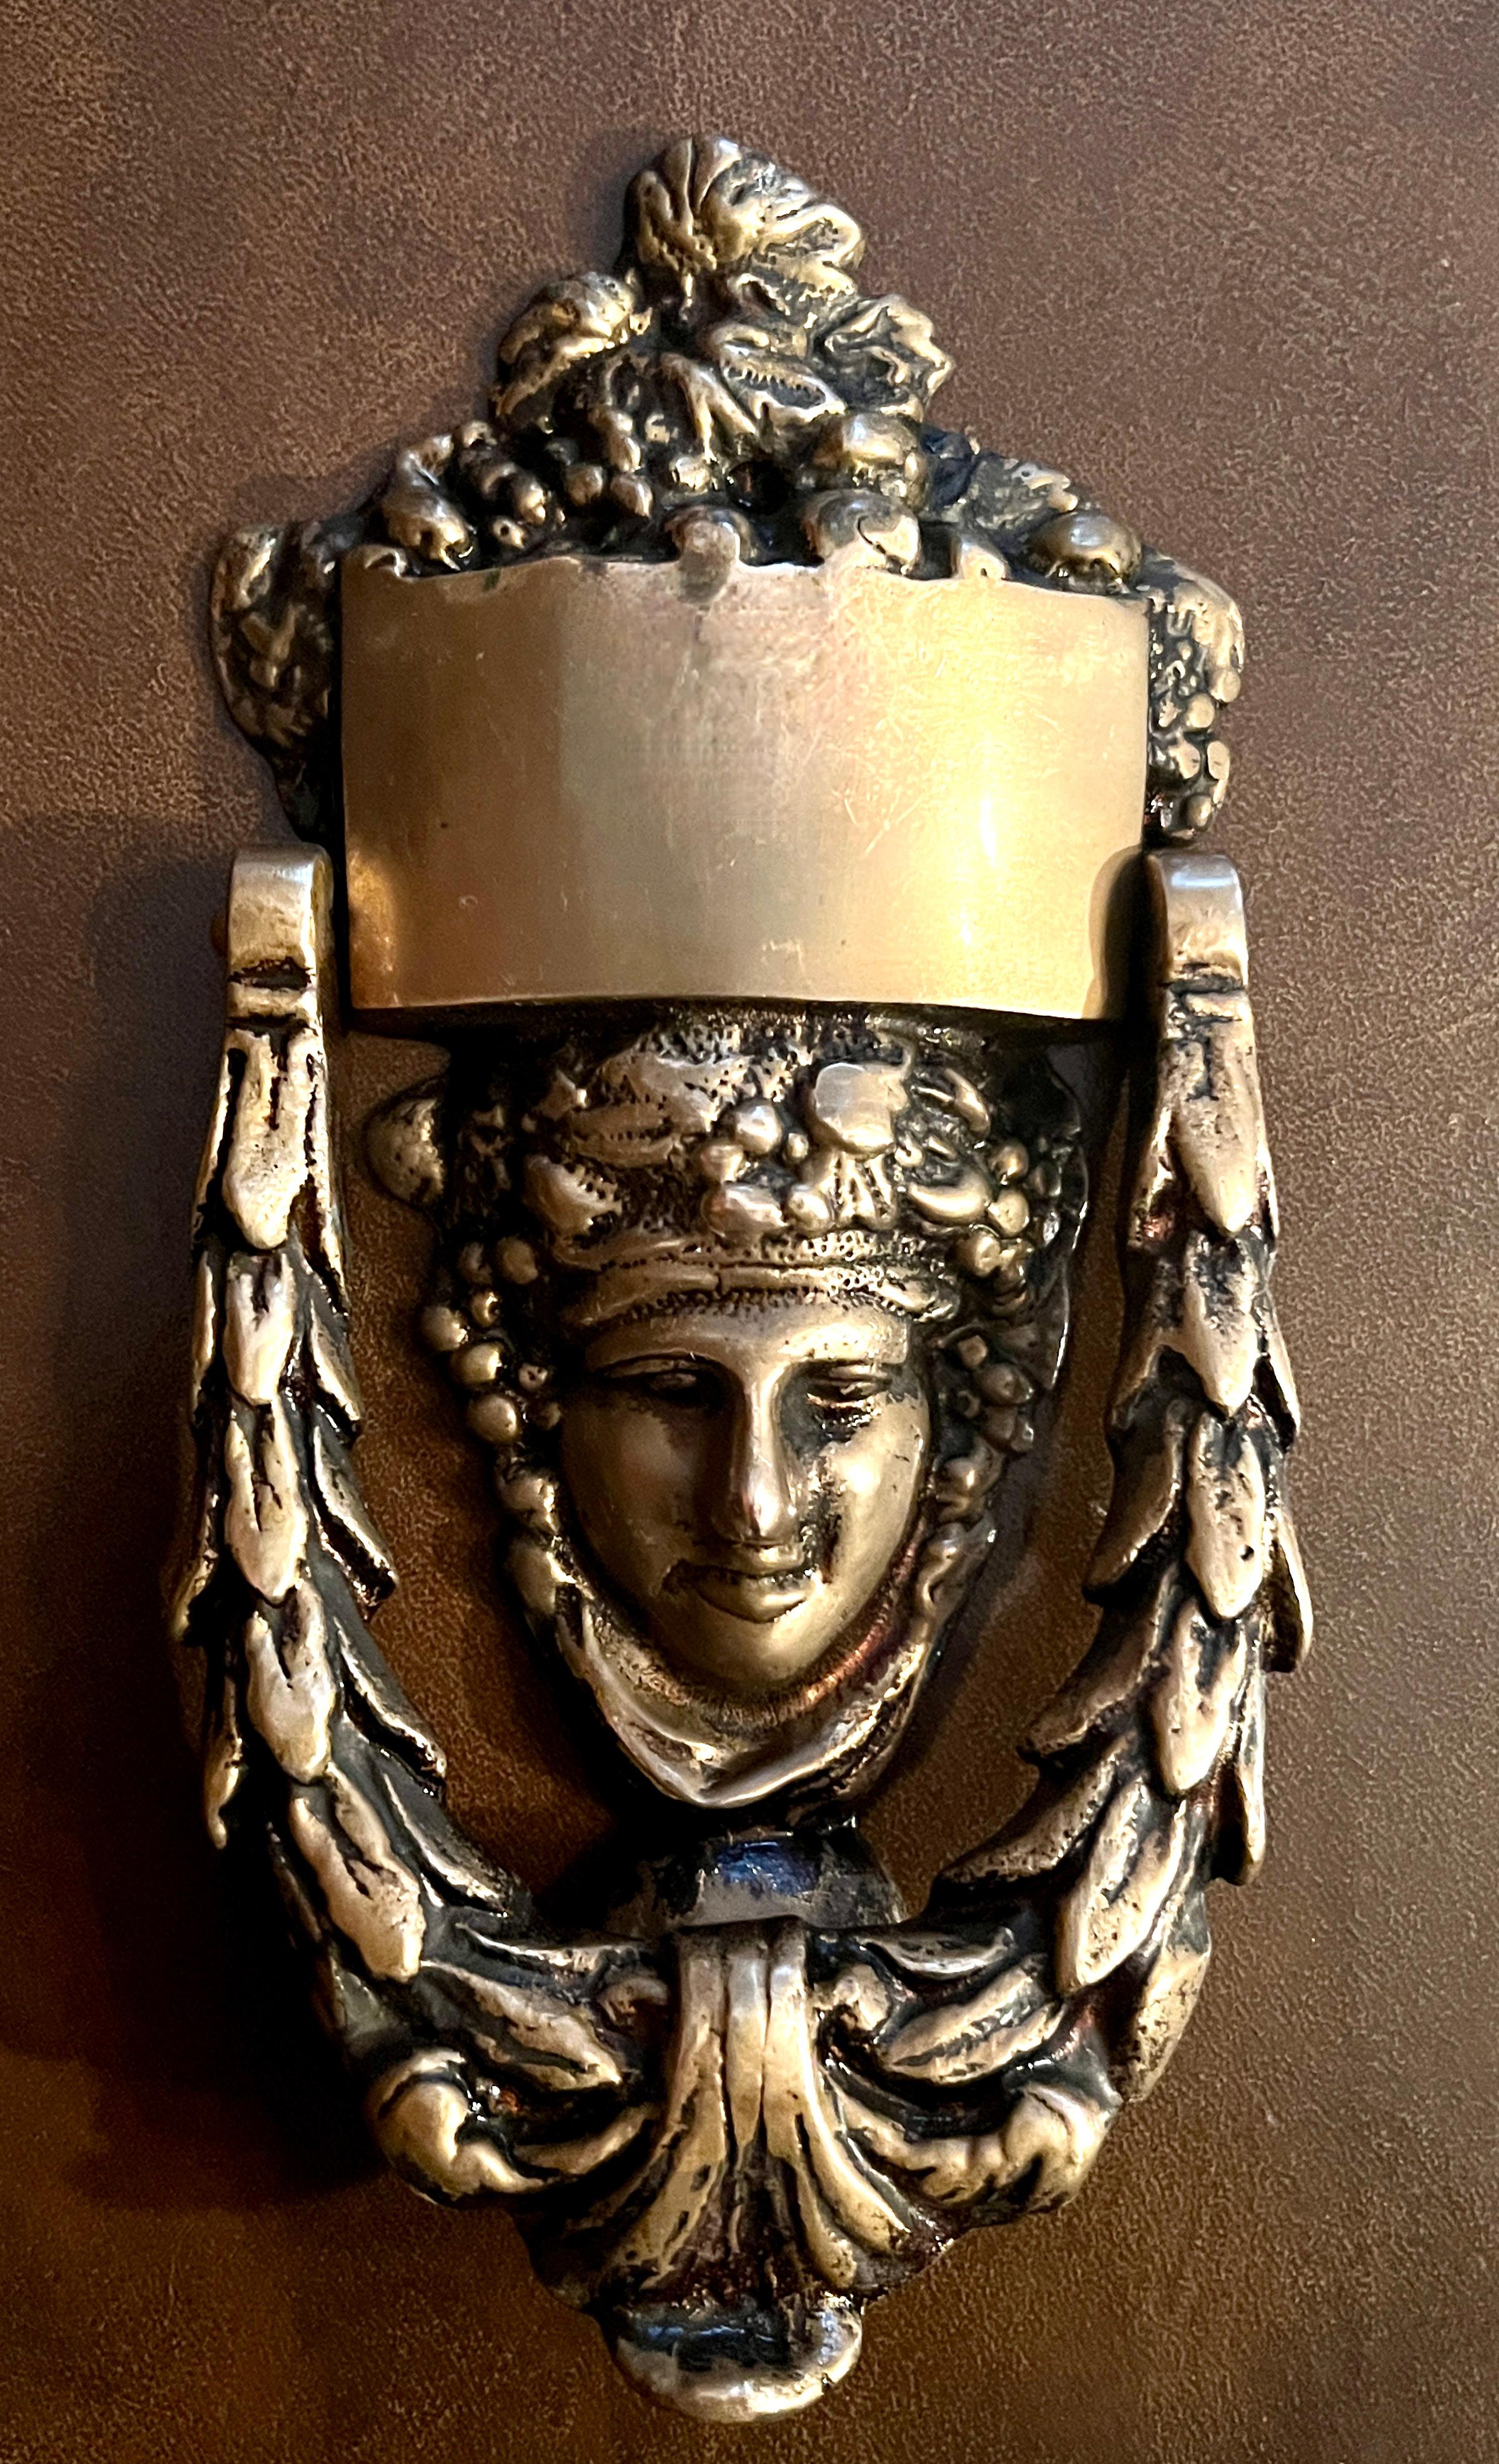 A Victorian Solid Brass Door Knocker with the face of Roman Goddess Dionysus.

The pieces is solid, well made and a compliment to many spaces or Doors.   The top has a band that could be engraved with a name or initials.

A perfect piece for the